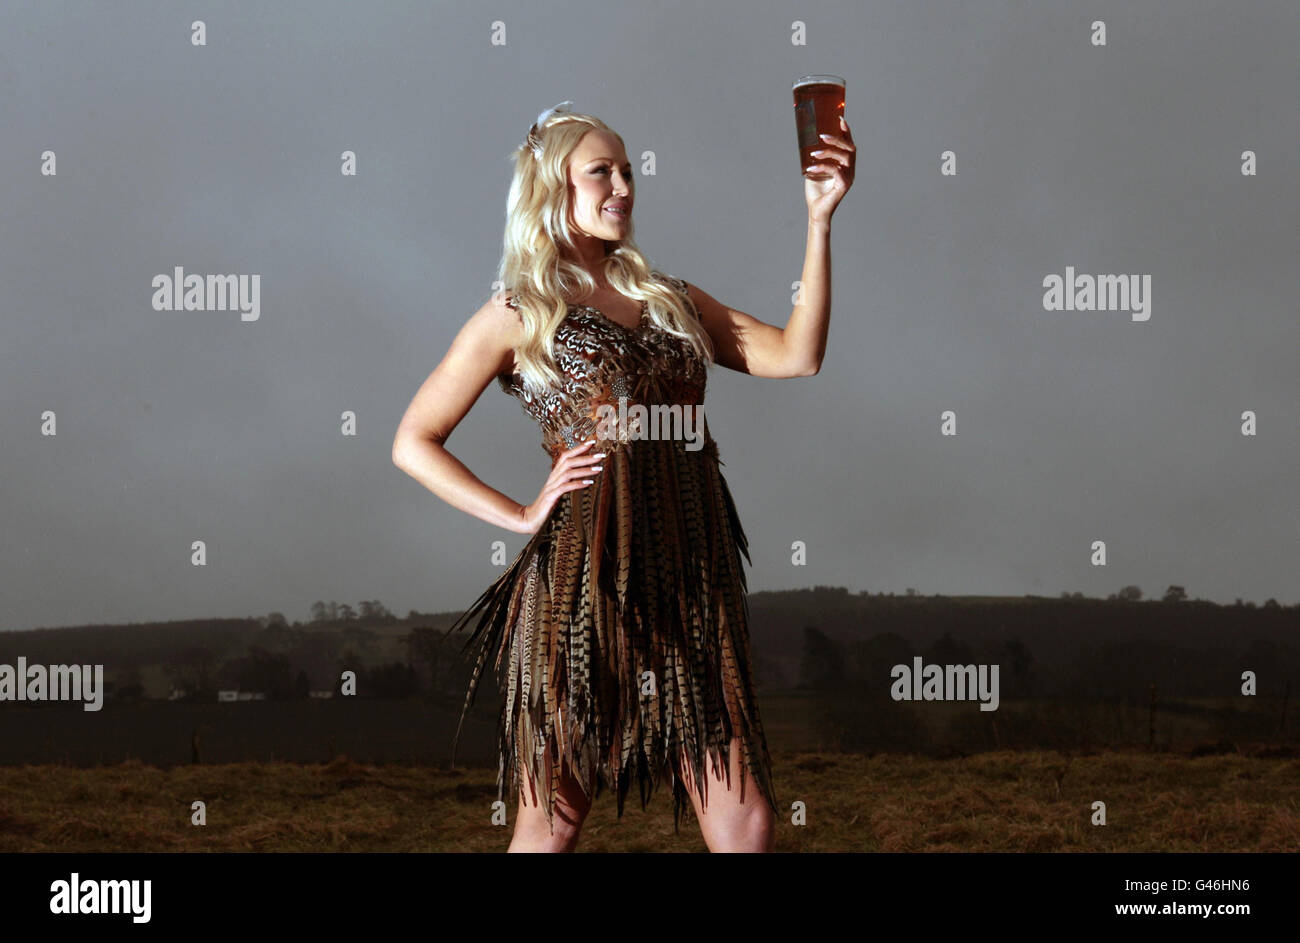 Former Miss Scotland Lois Weatherup in a dress made from Pheasant feathers for the launch of Foxy Blond, the first new ale from the Scottish Borders Brewery based near Ancrum. Stock Photo